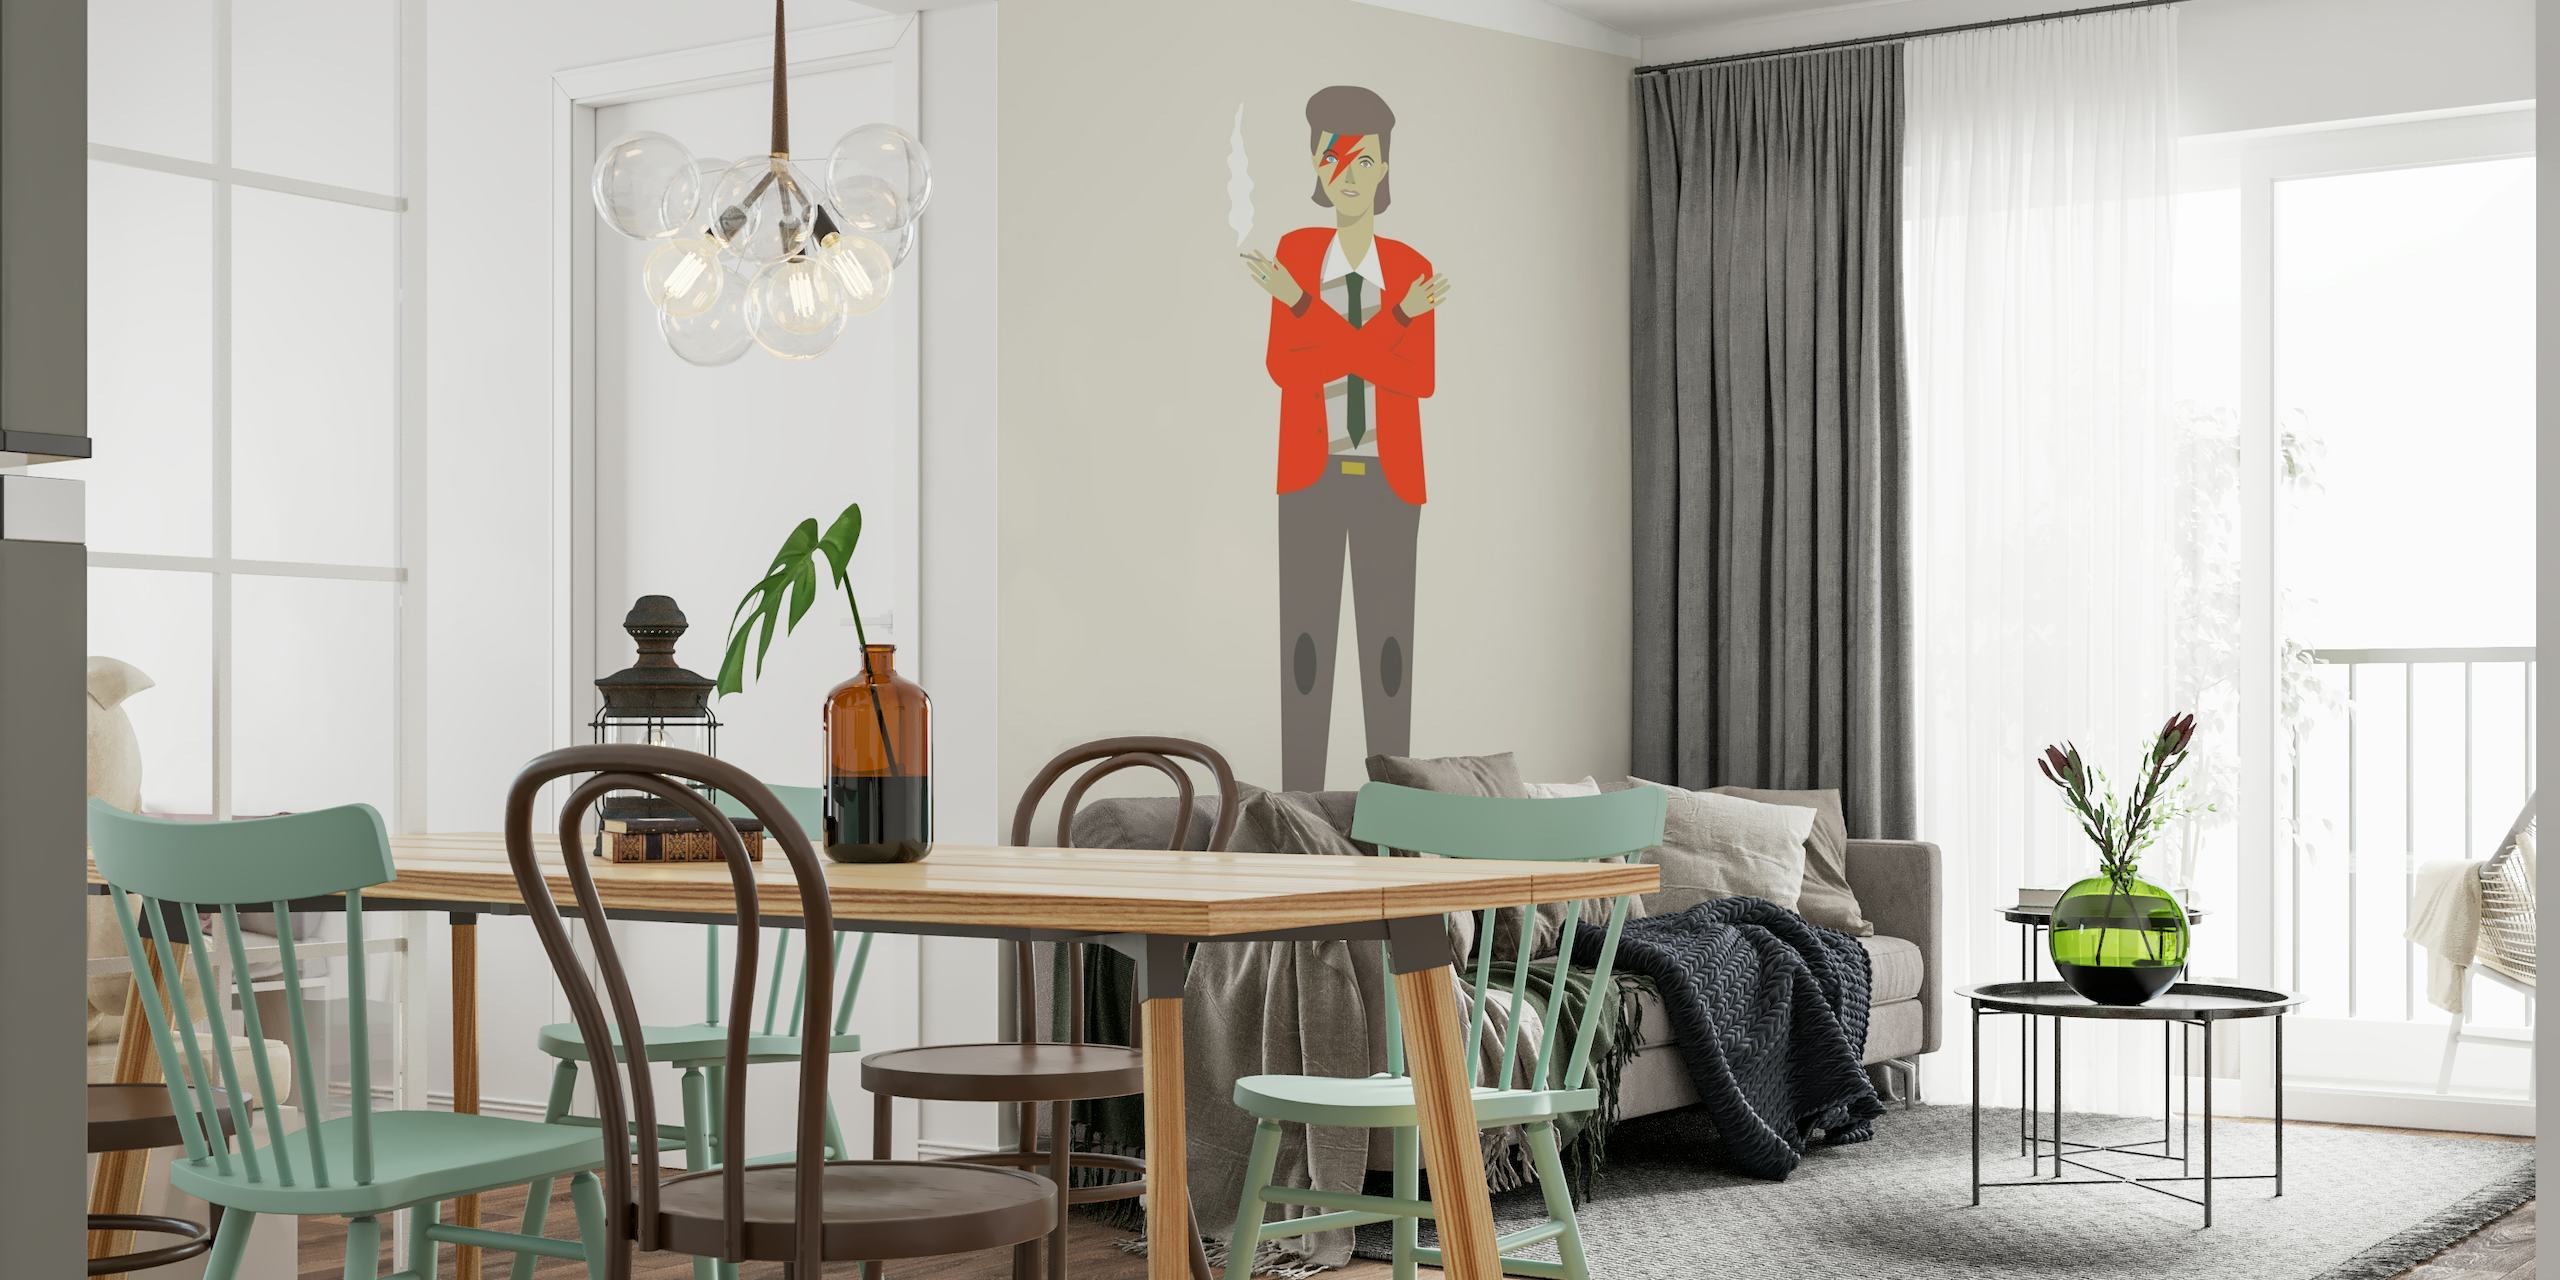 Illustrated wall mural of a stylized gentleman in a red jacket